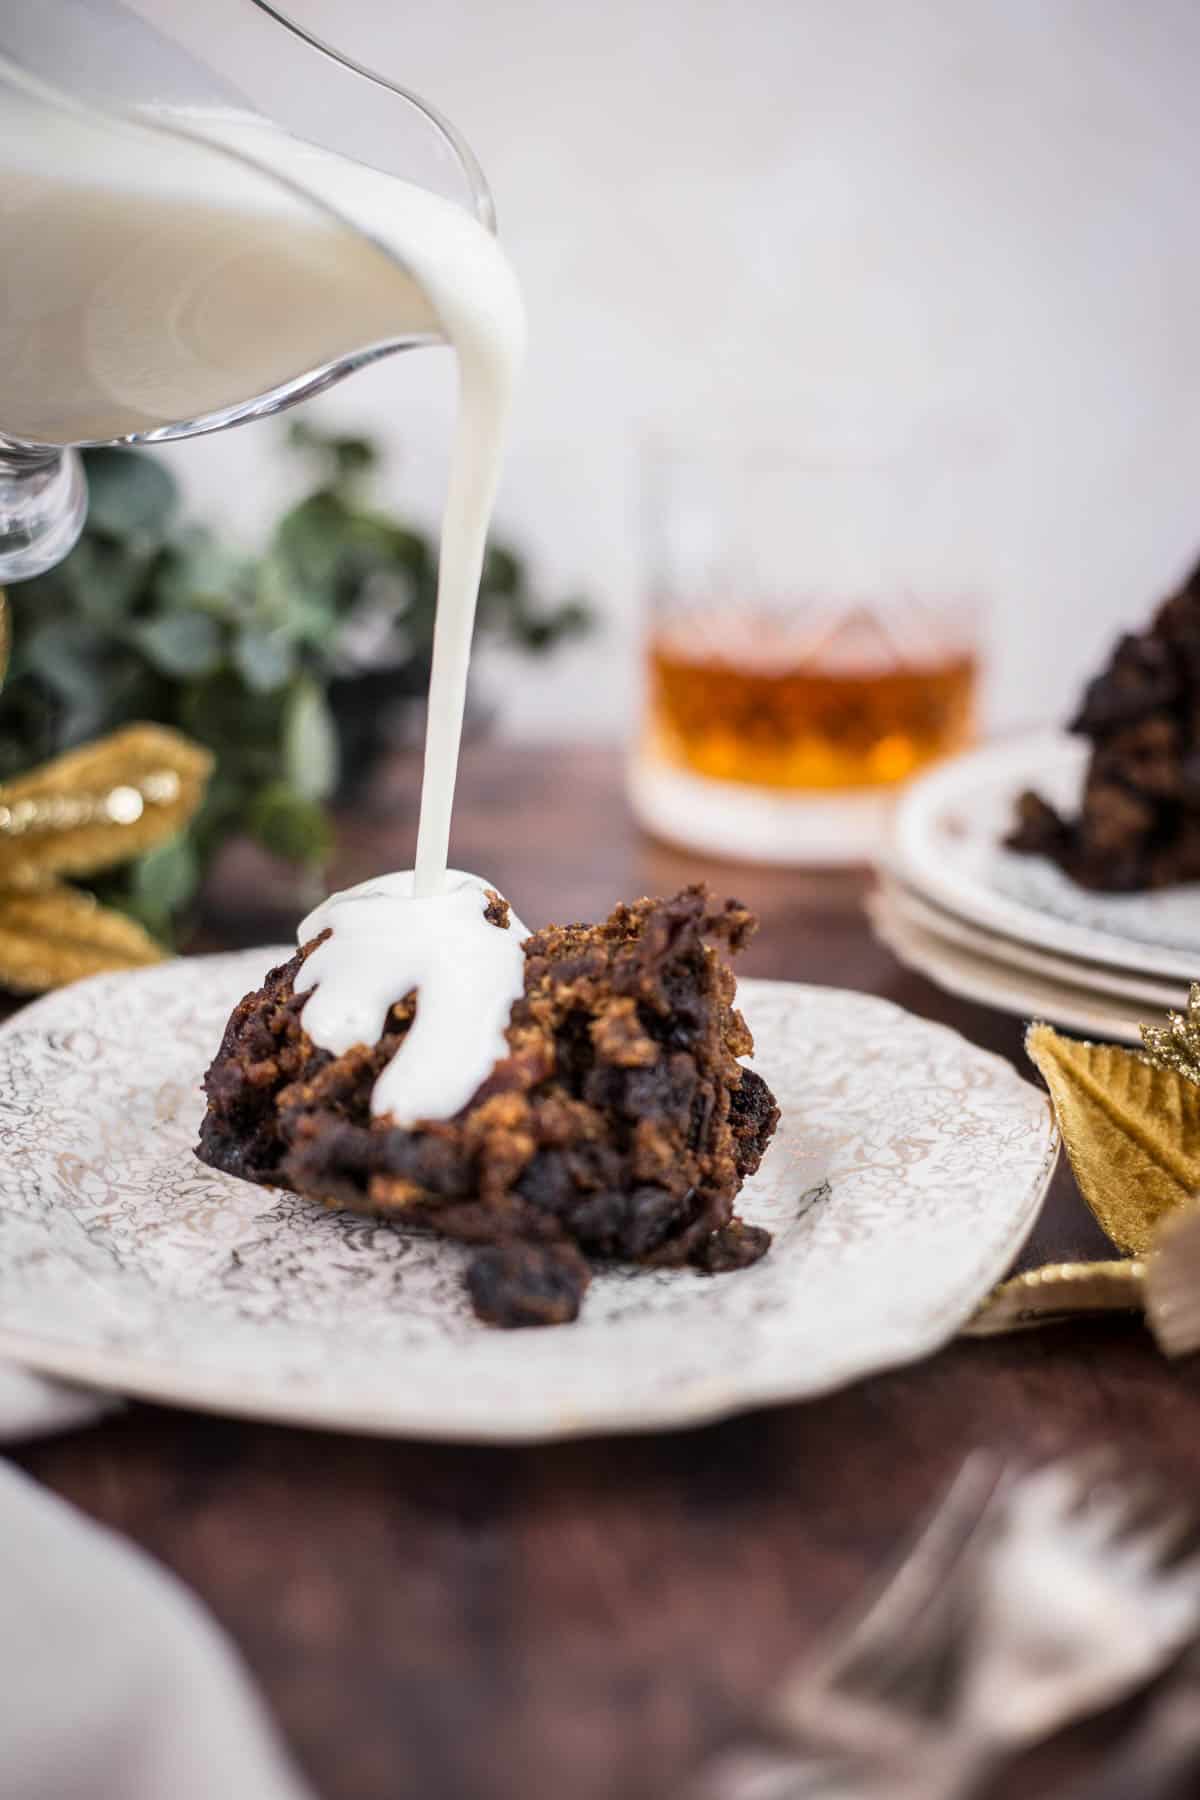 Brandy sauce poured over a plate of christmas pudding on festive table